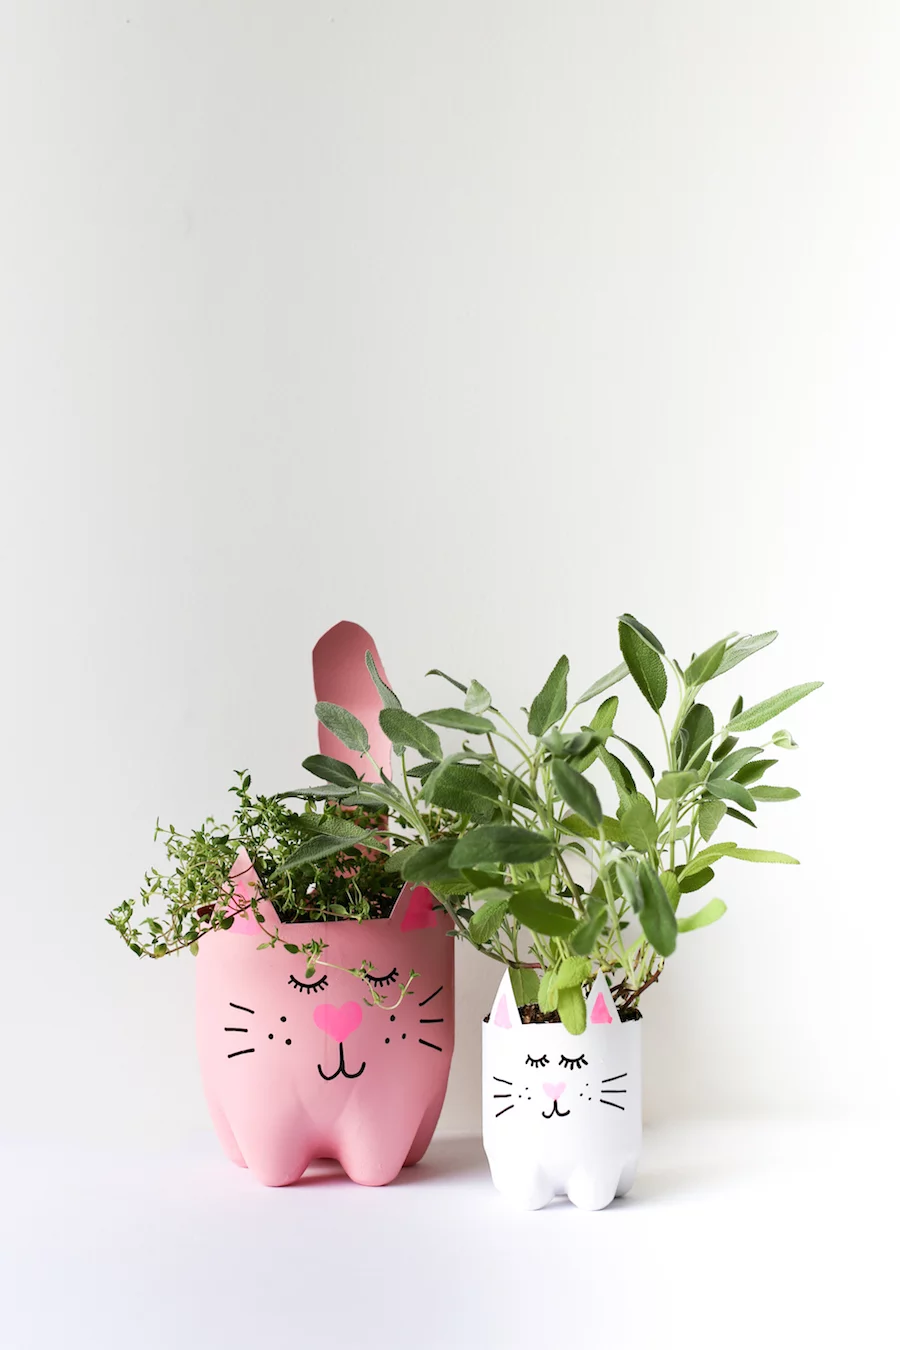 Turn an empty soda bottle into an adorable kitty plant planter for catnip, herbs, or even a cactus or succulent! Easy to make and so cute! // Salty Canary